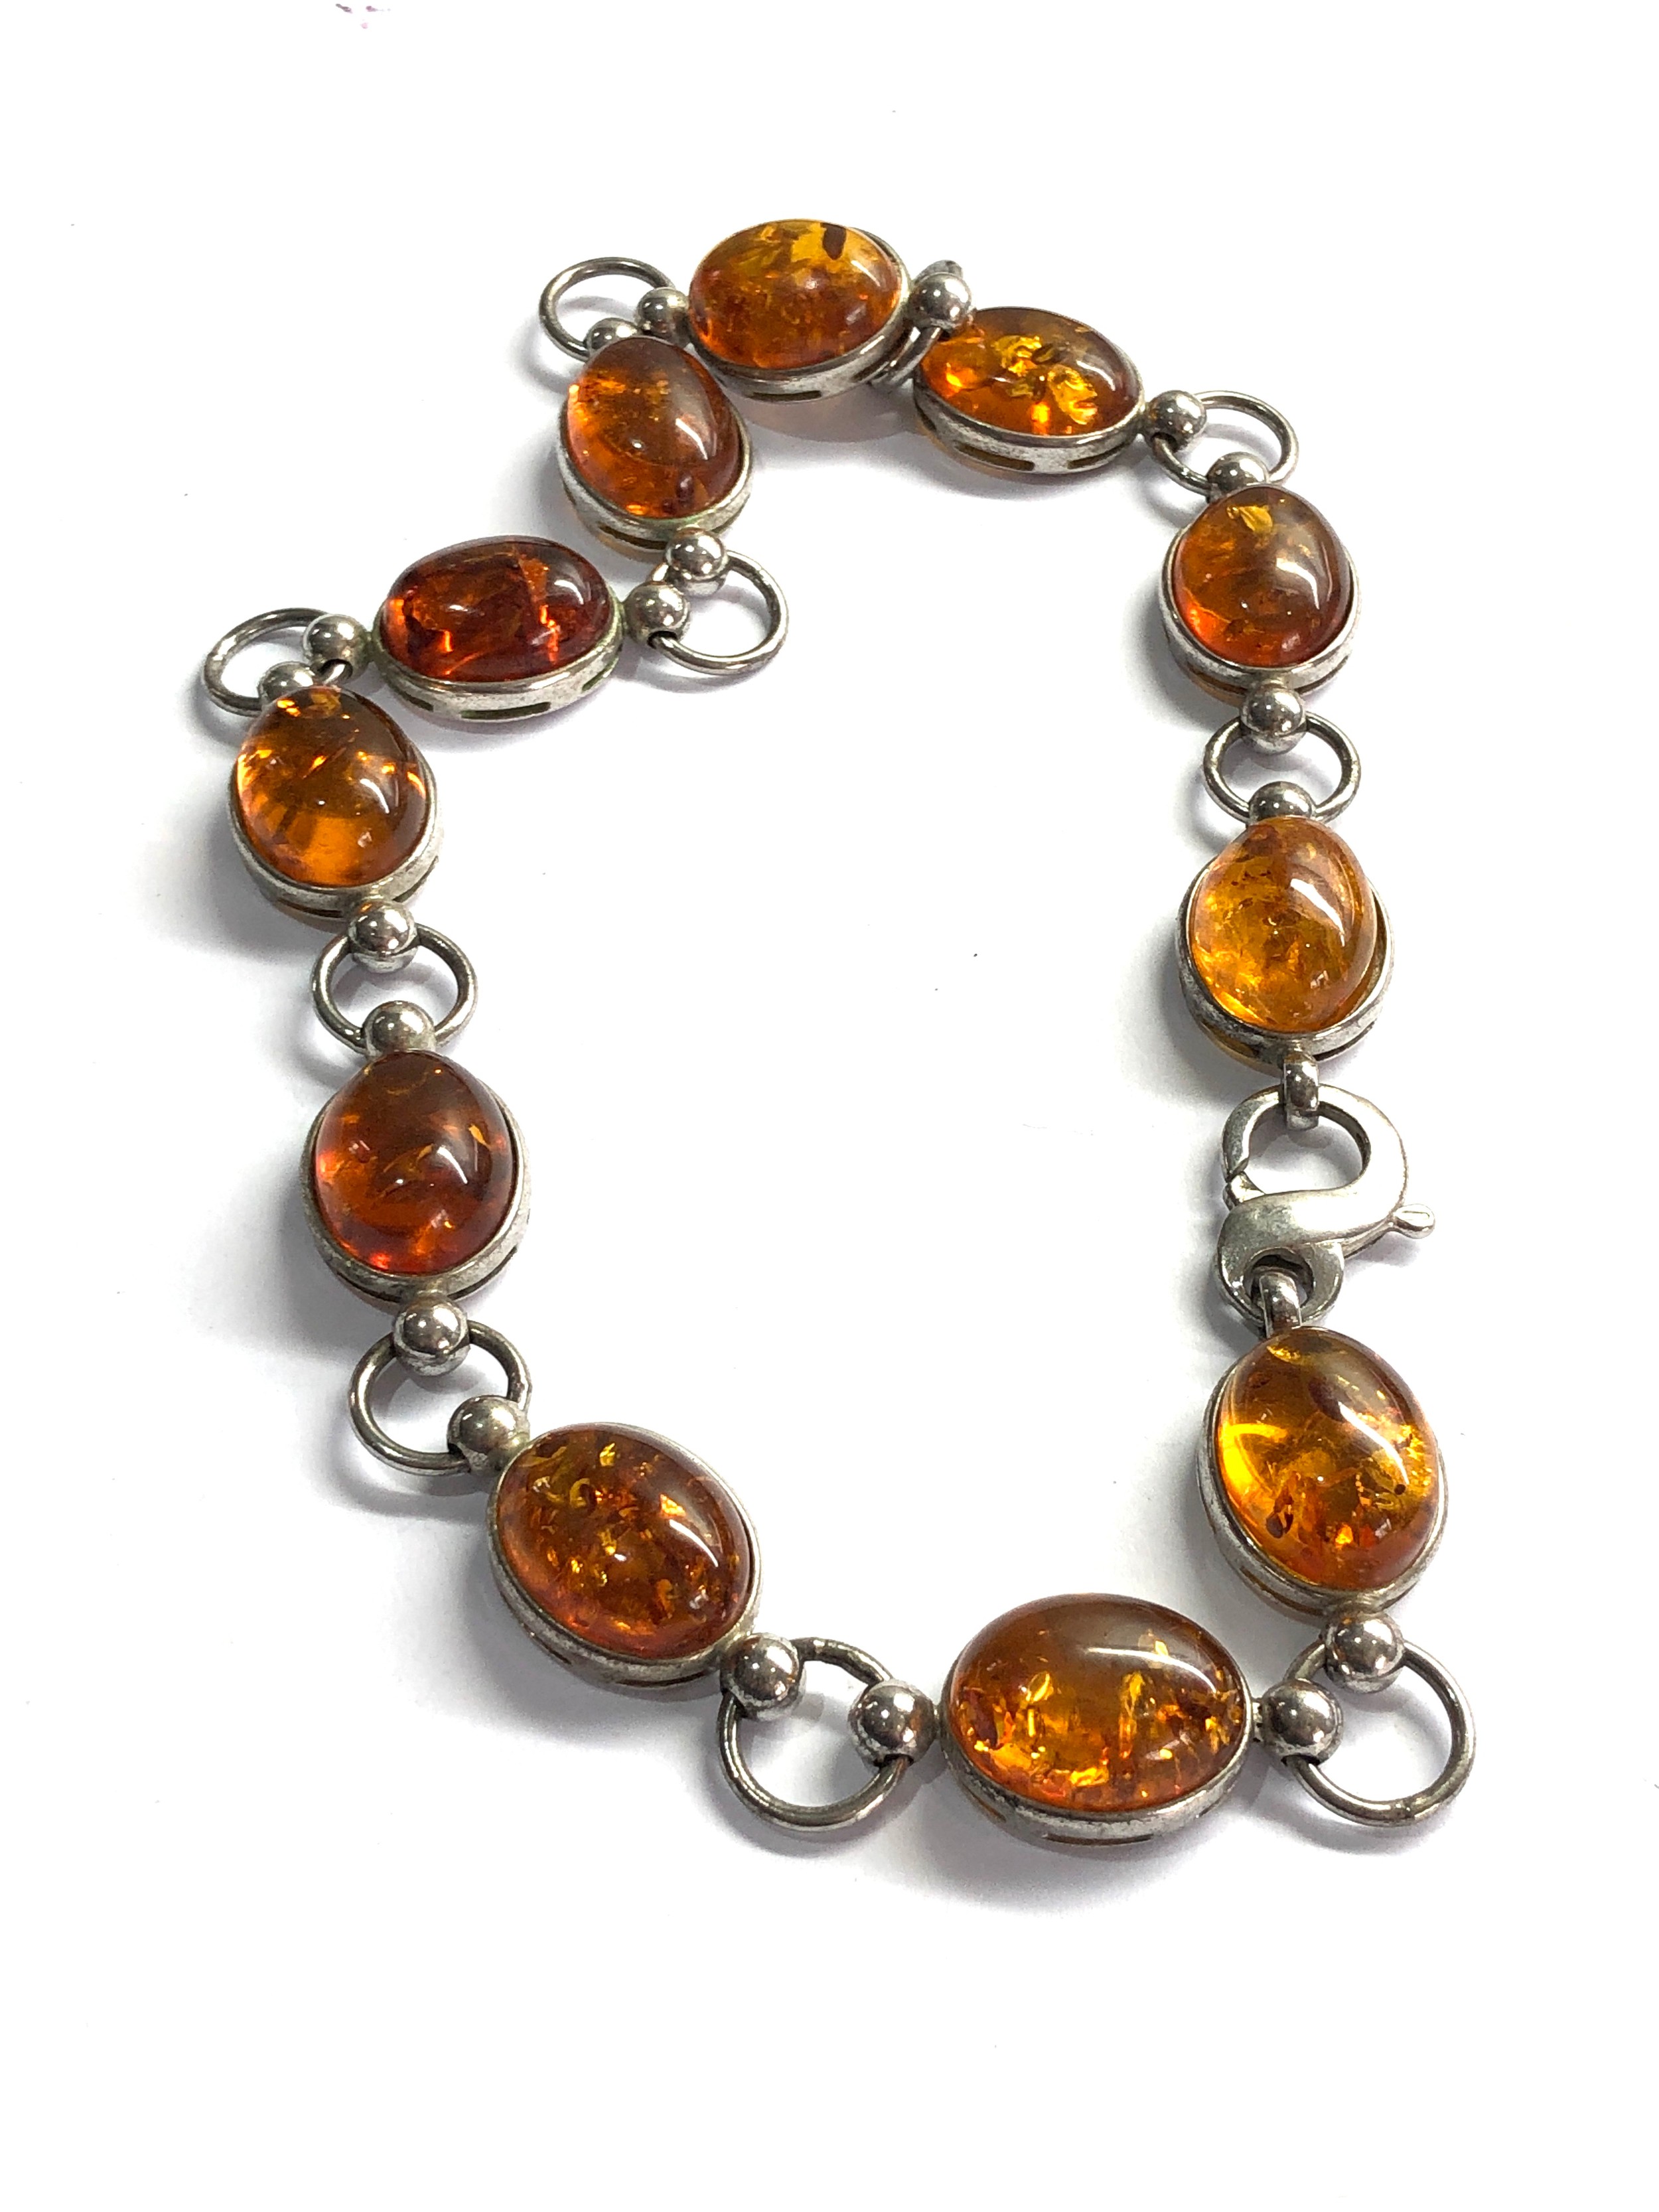 .925 sterling silver & amber heavy ring/ bead chain choker necklace 80g